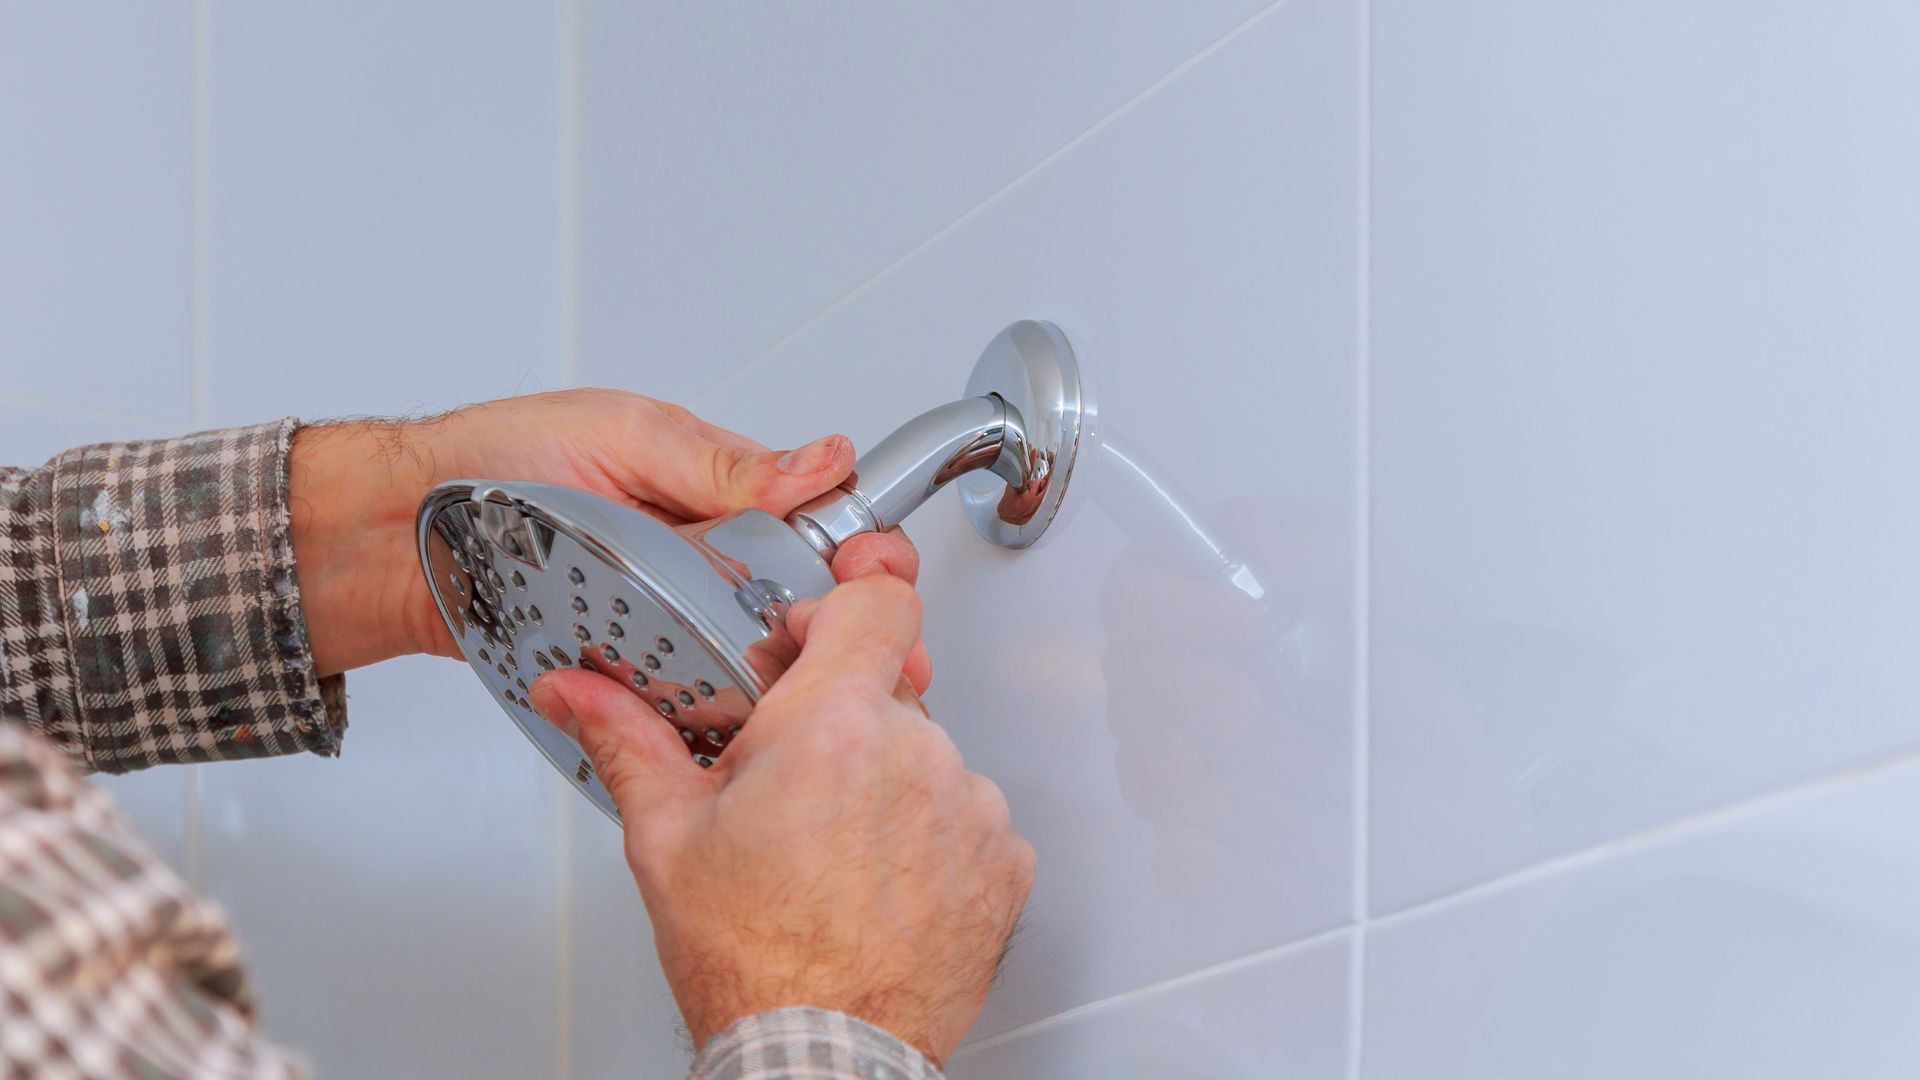 Replacement services for showers and tubs provided by our experienced plumbers.